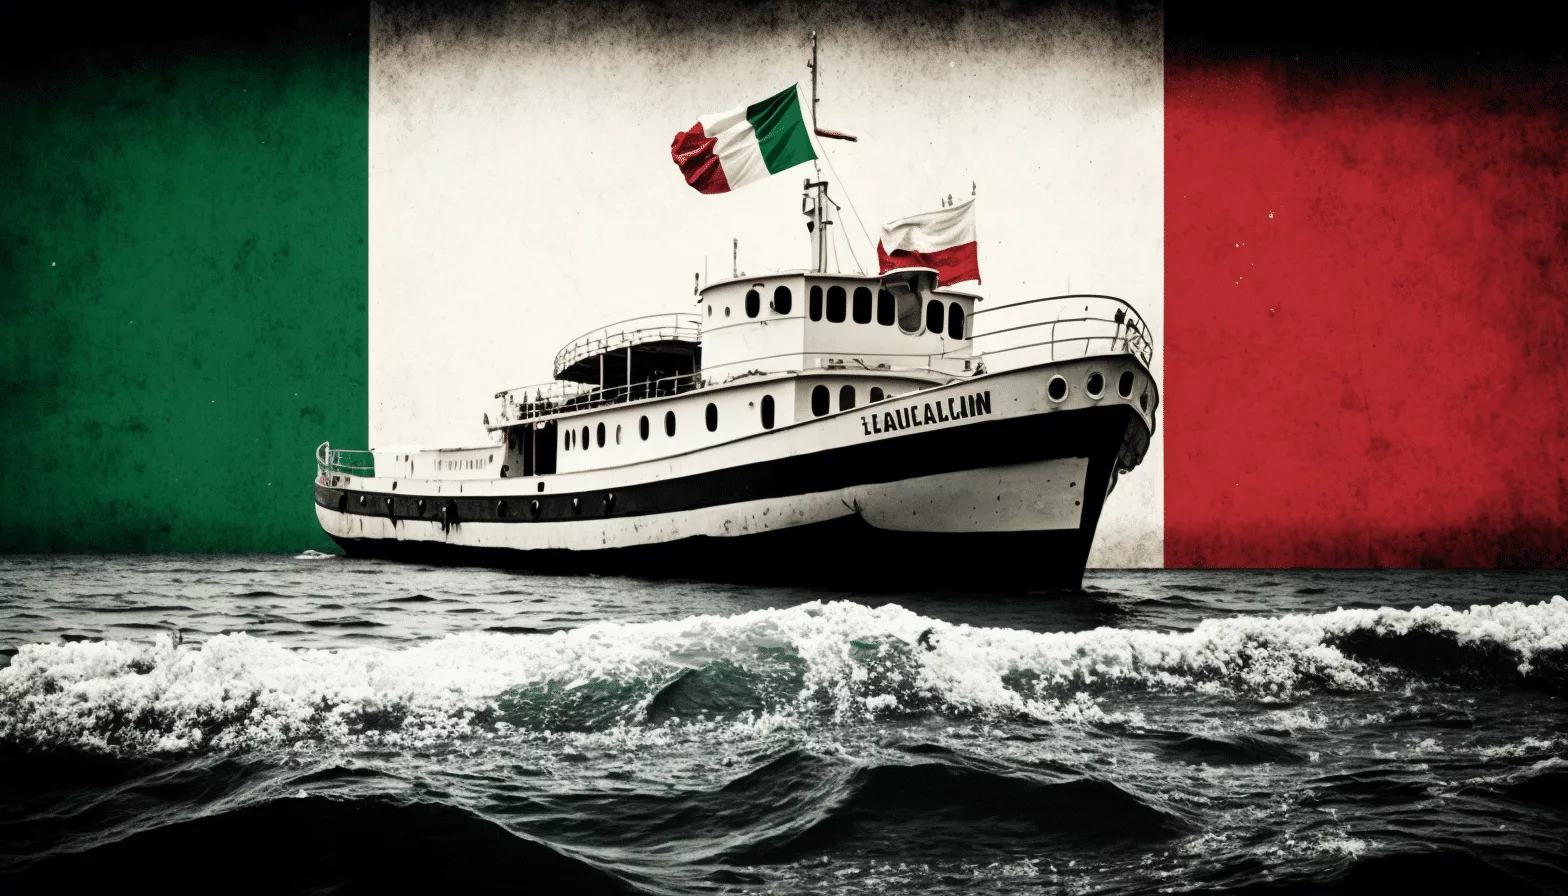 A boat in the water with an italian flag on it.